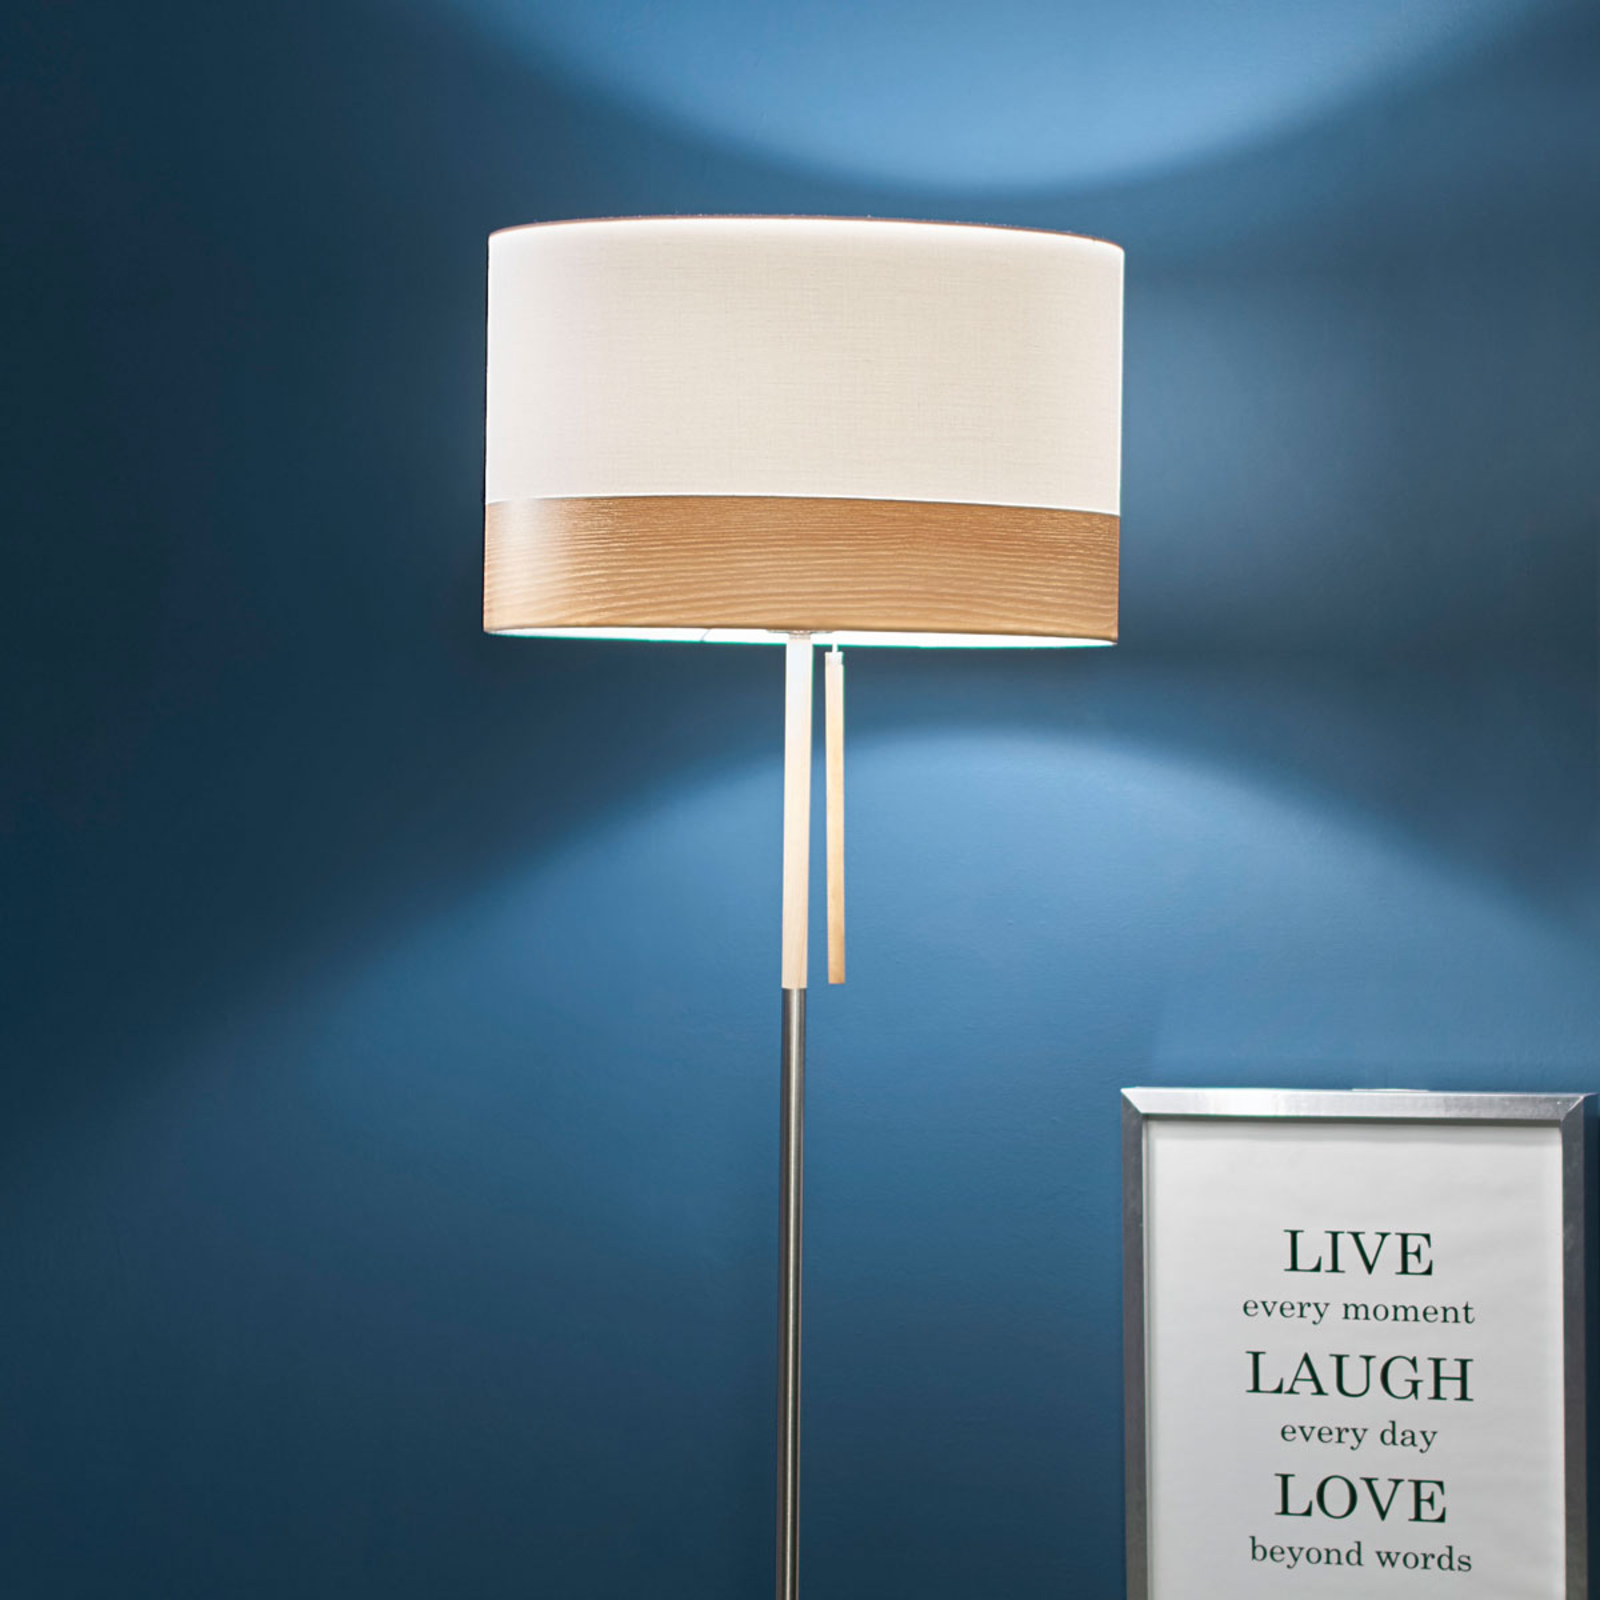 With a pull switch - floor lamp Libba, cream-wood